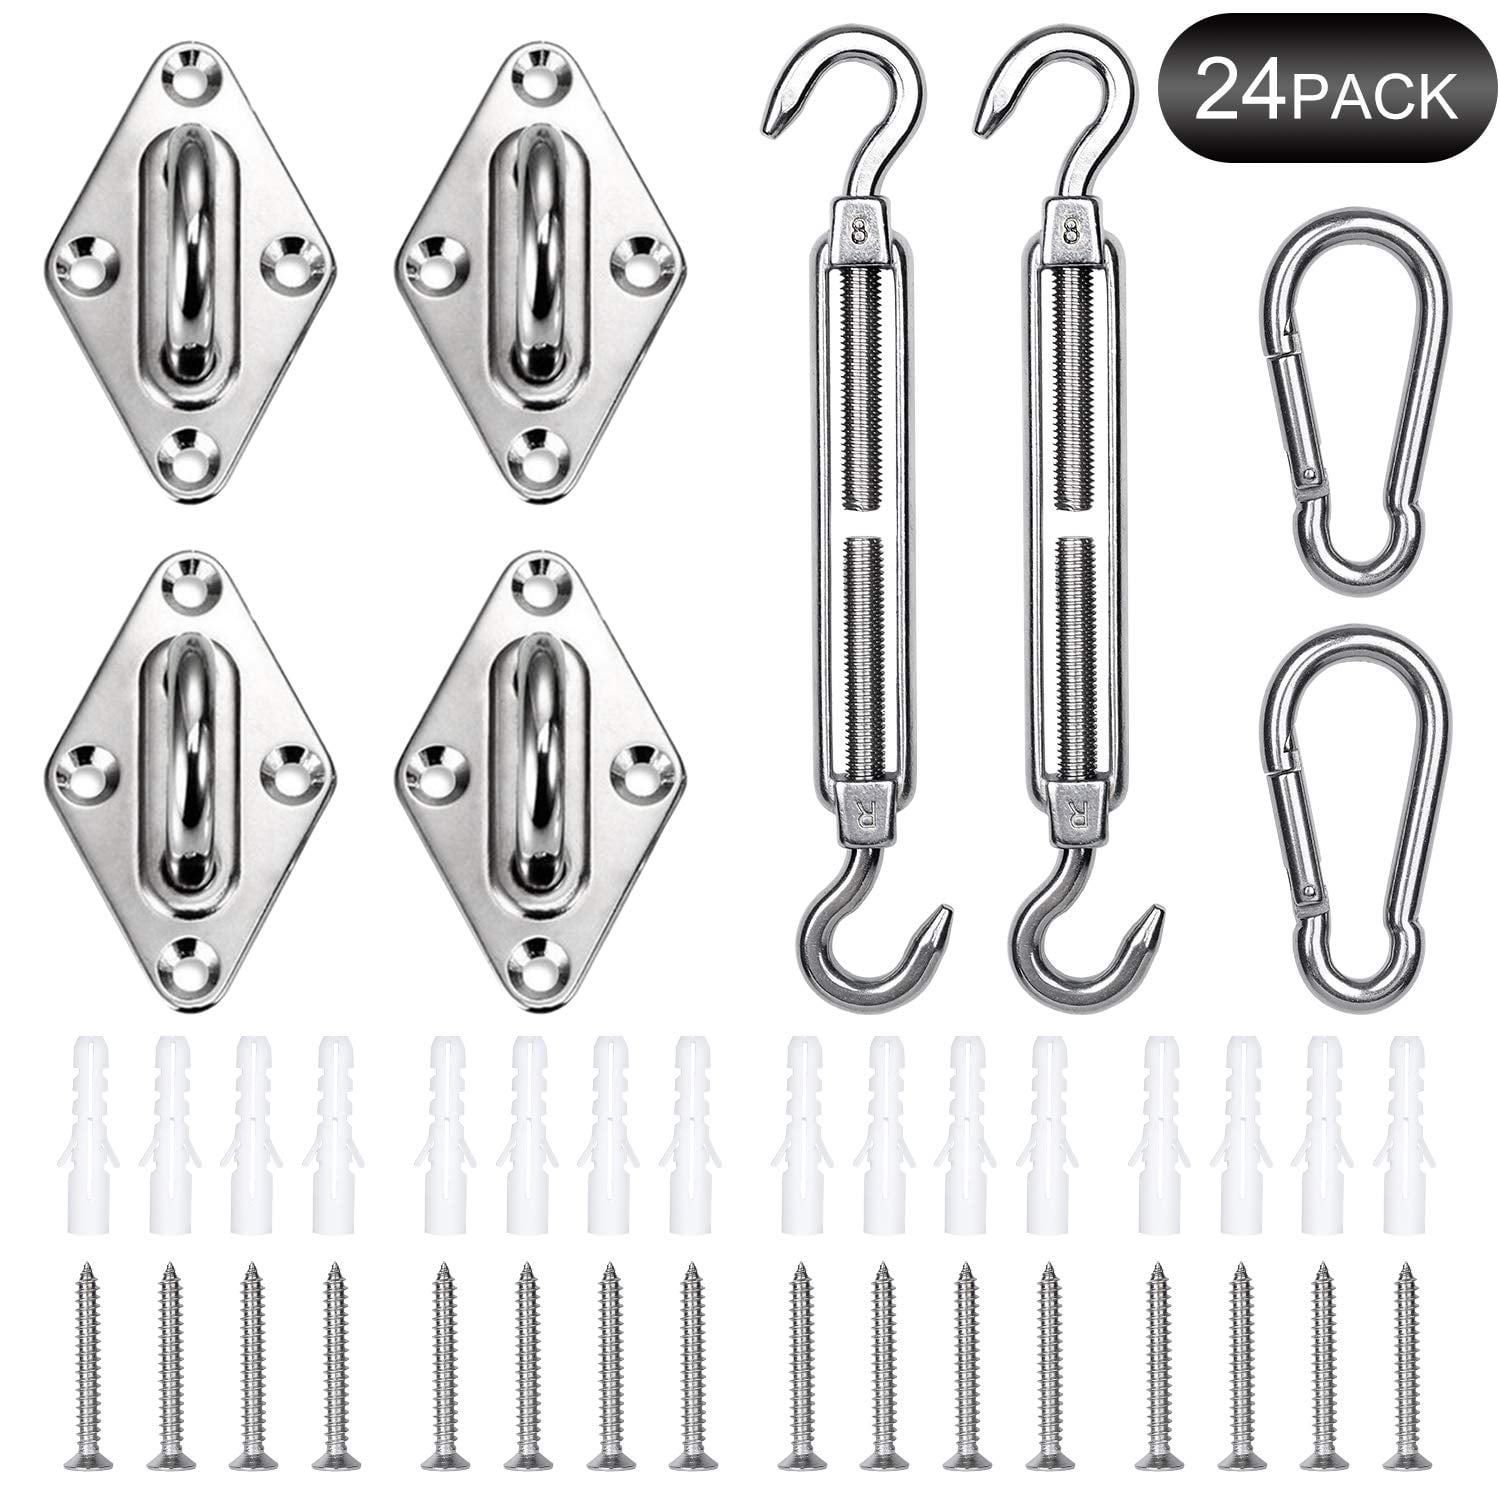 5 Inches 304 Marine Grade Stainless Steel Sun Shade Sail Installation Hardware Kit for Rectangle&Square Sun Shade Sail Alpurple 4 Set Shade Sail Hardware Kit